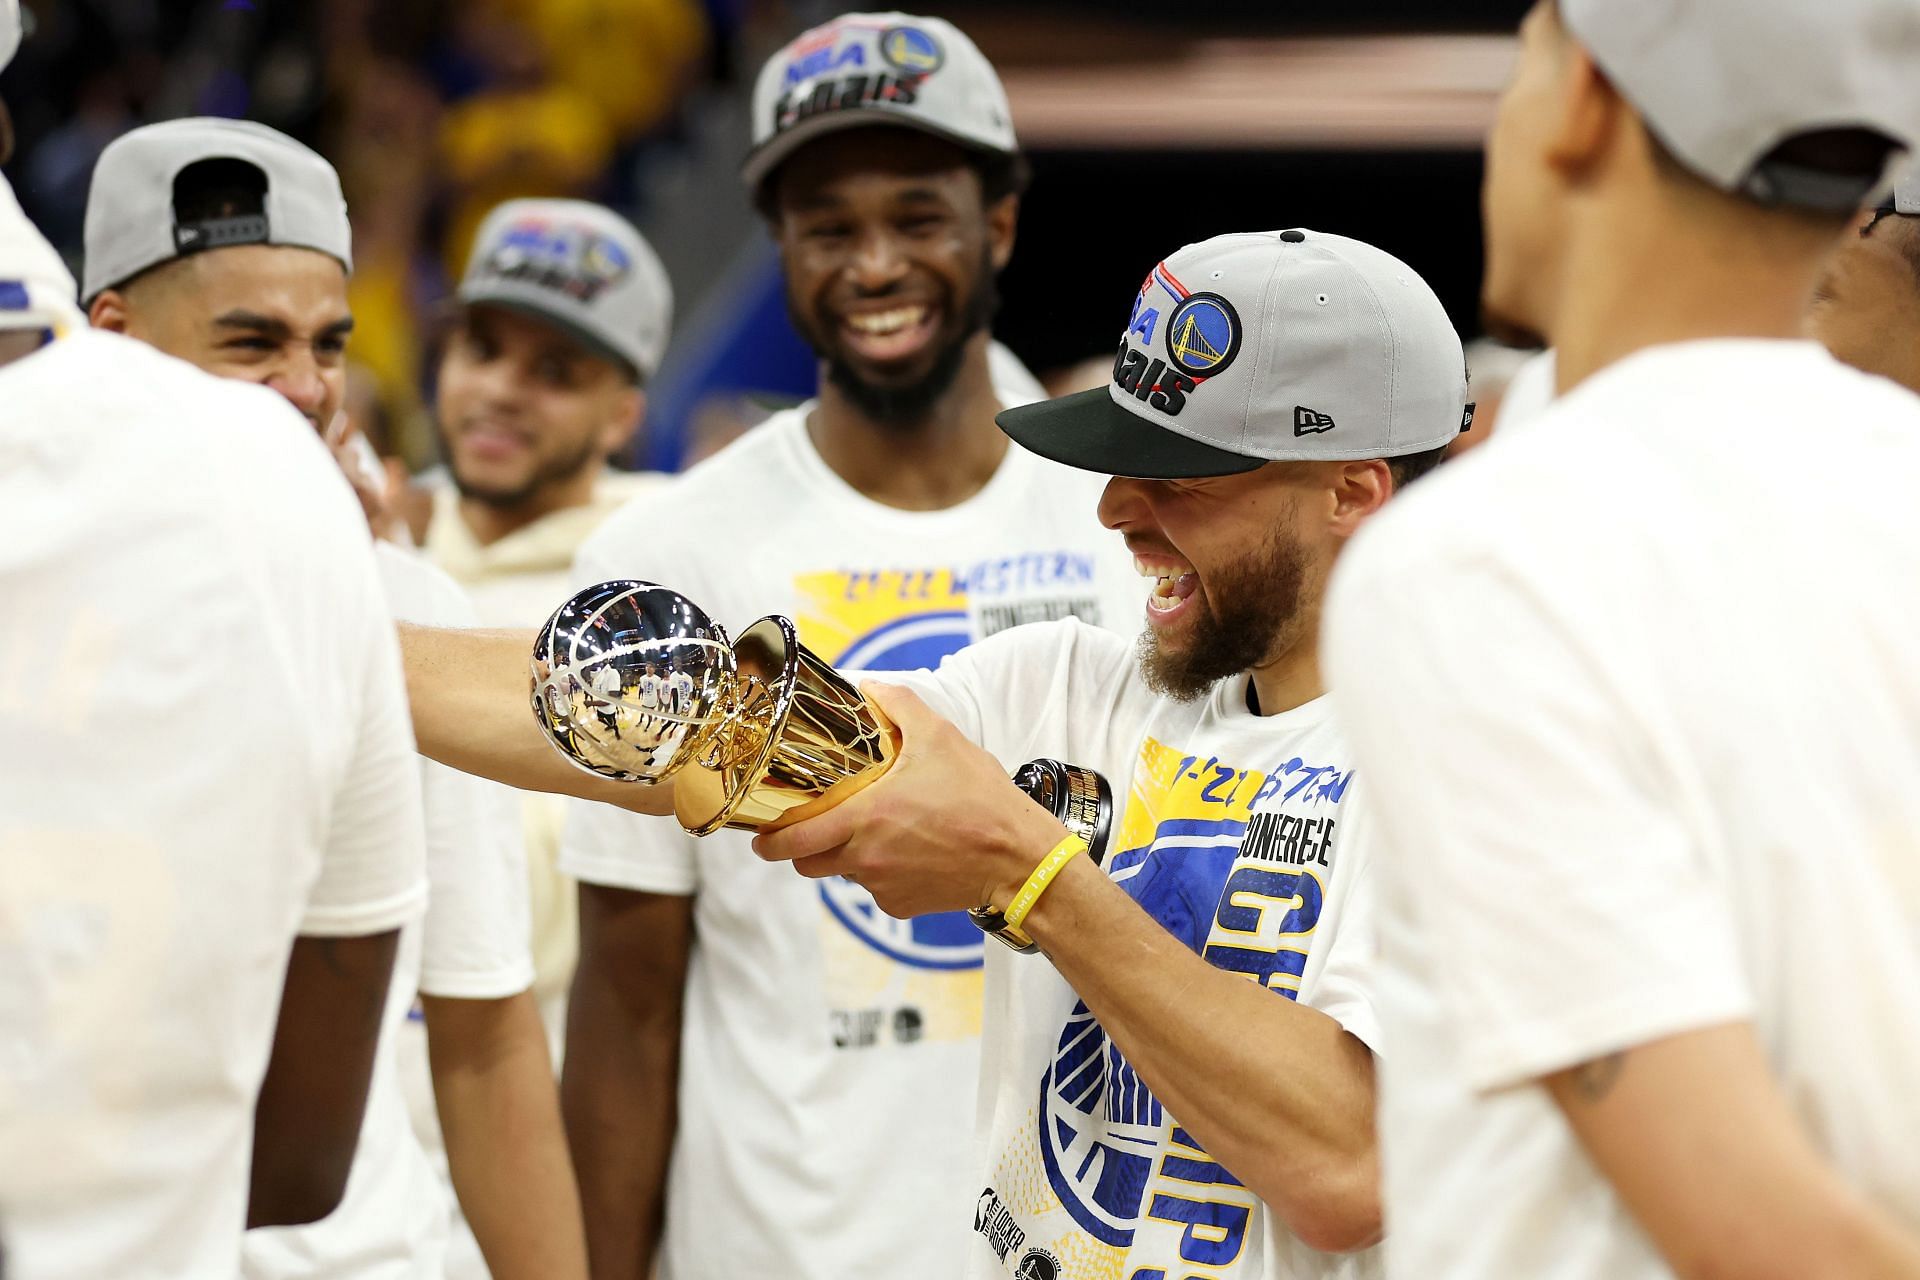 Steph Curry of the Golden State Warriors celebrates winning the Magic Johnson WCFMVP trophy